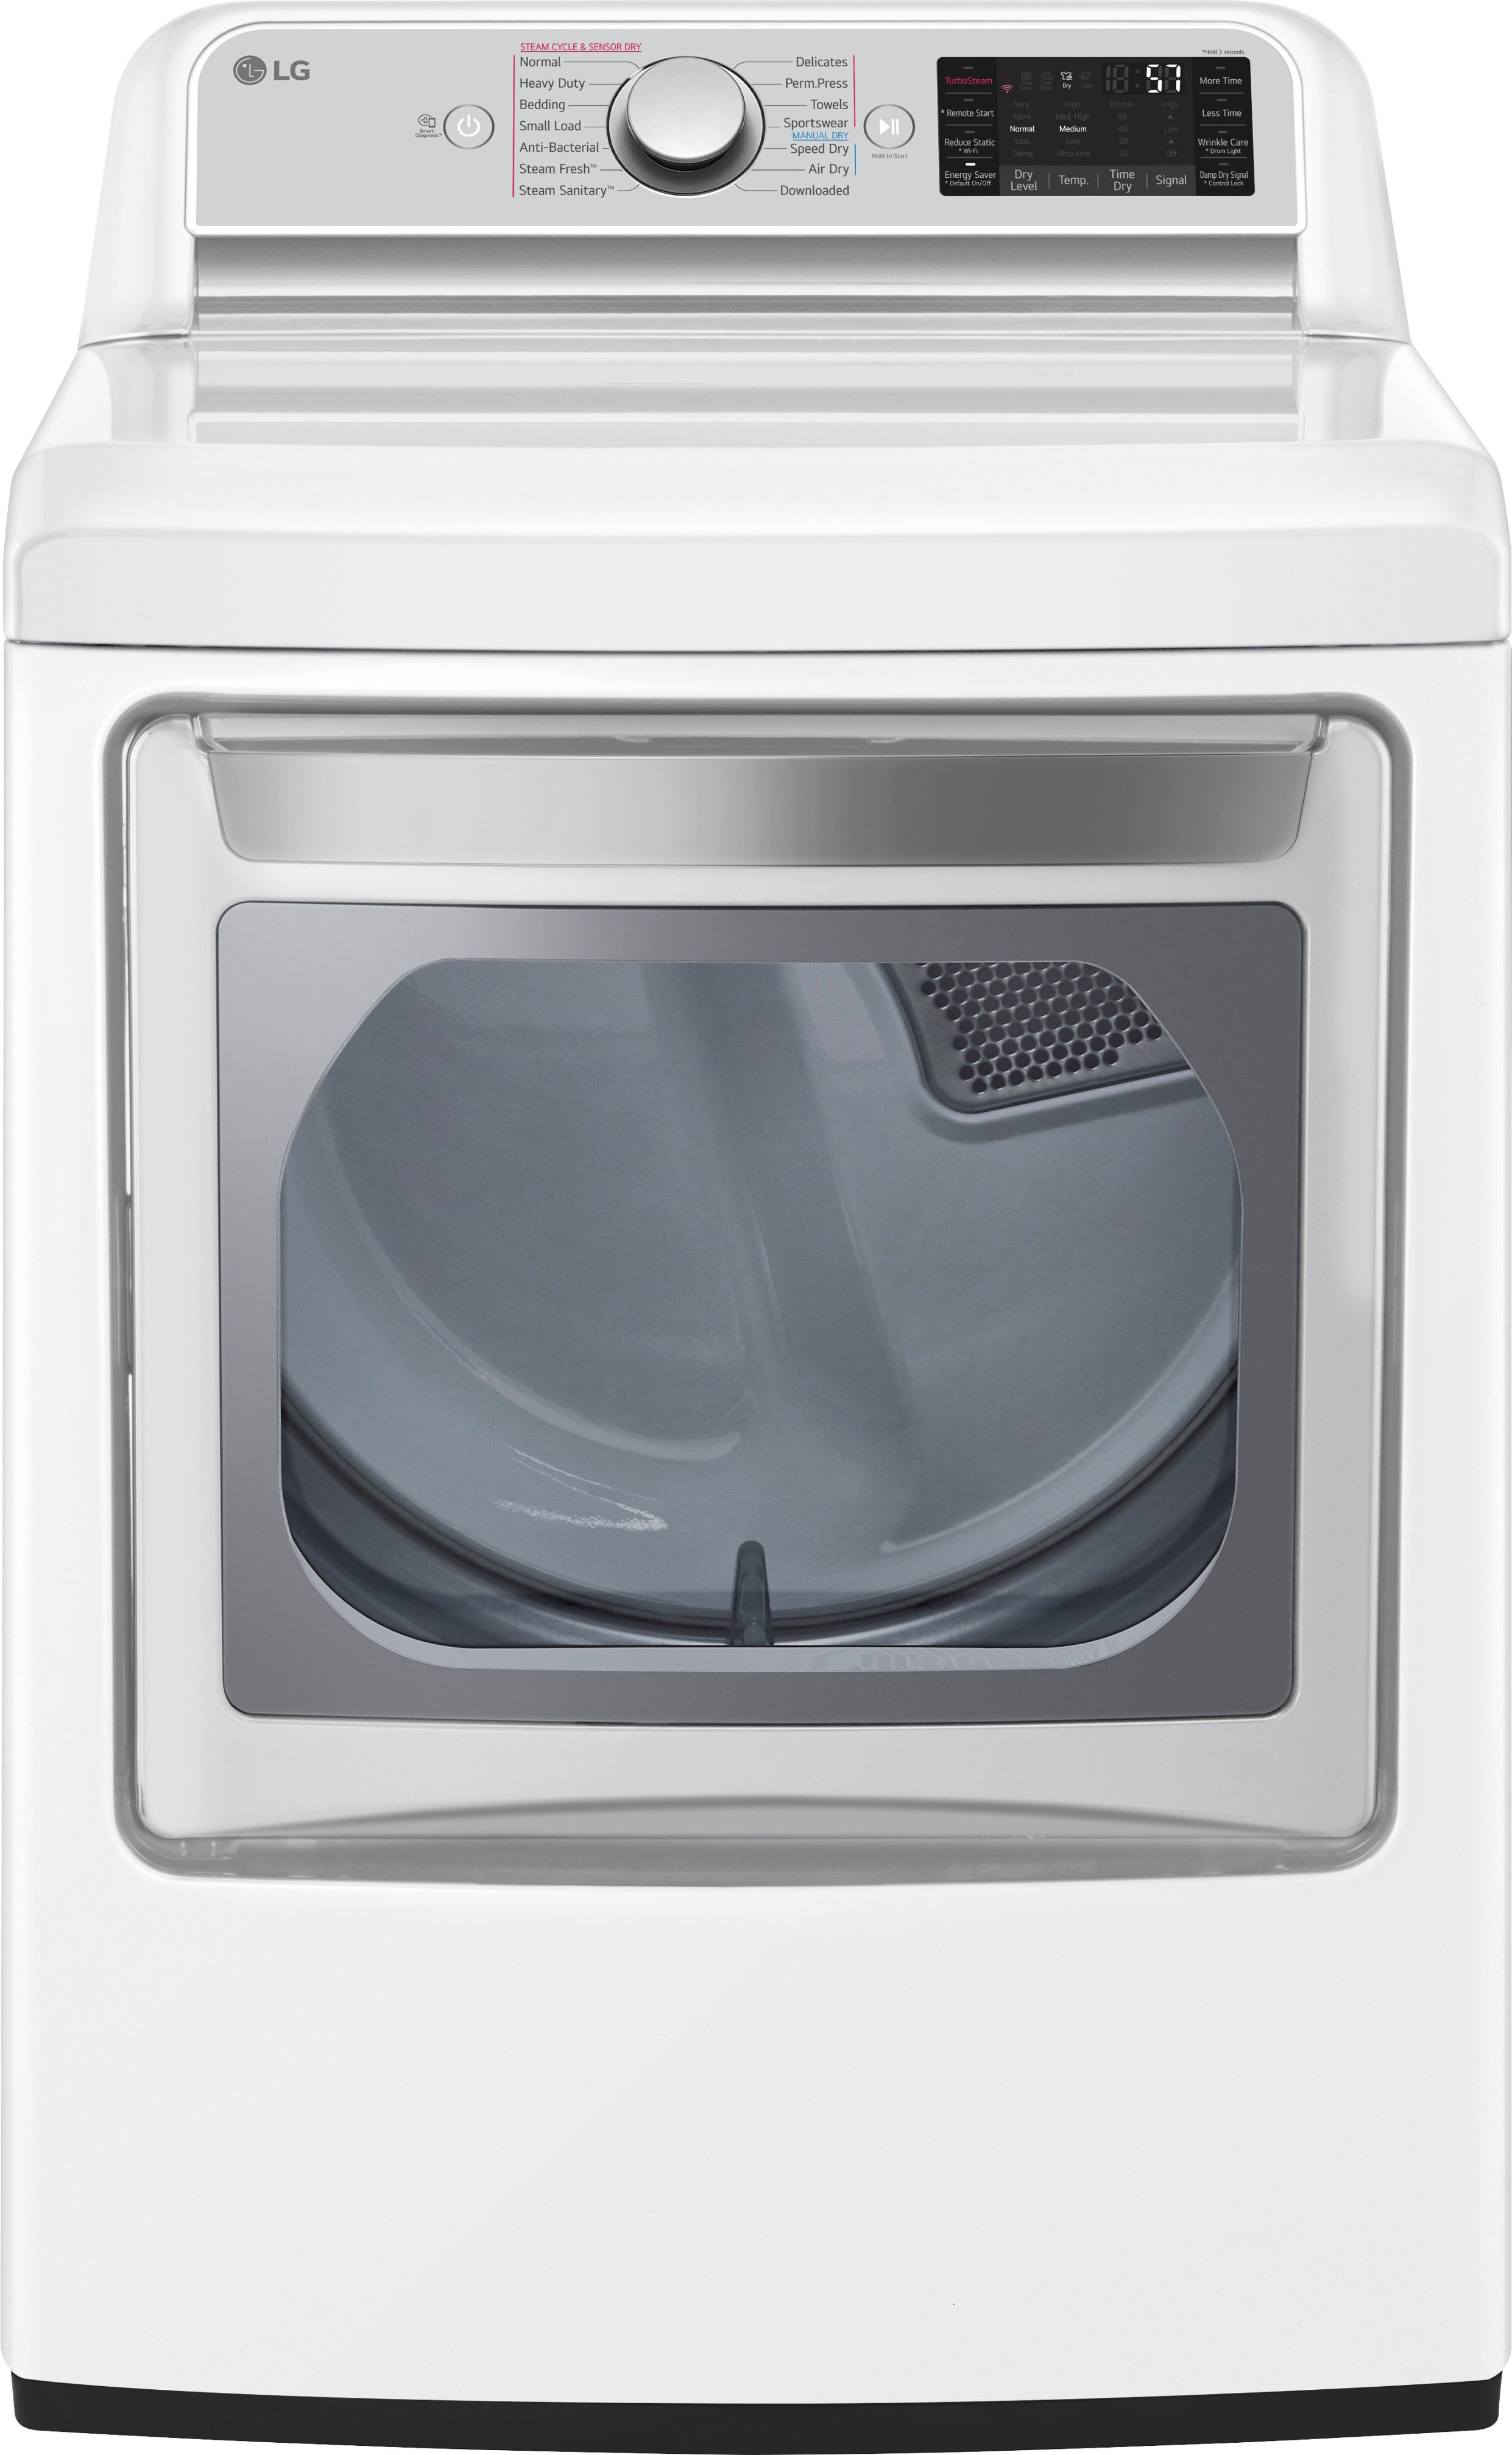 LG LG 7.3 Cu. ft. Ultra Large Capacity Smart Wi-Fi Enabled Rear Control Electric Dryer with TurboSteam - White